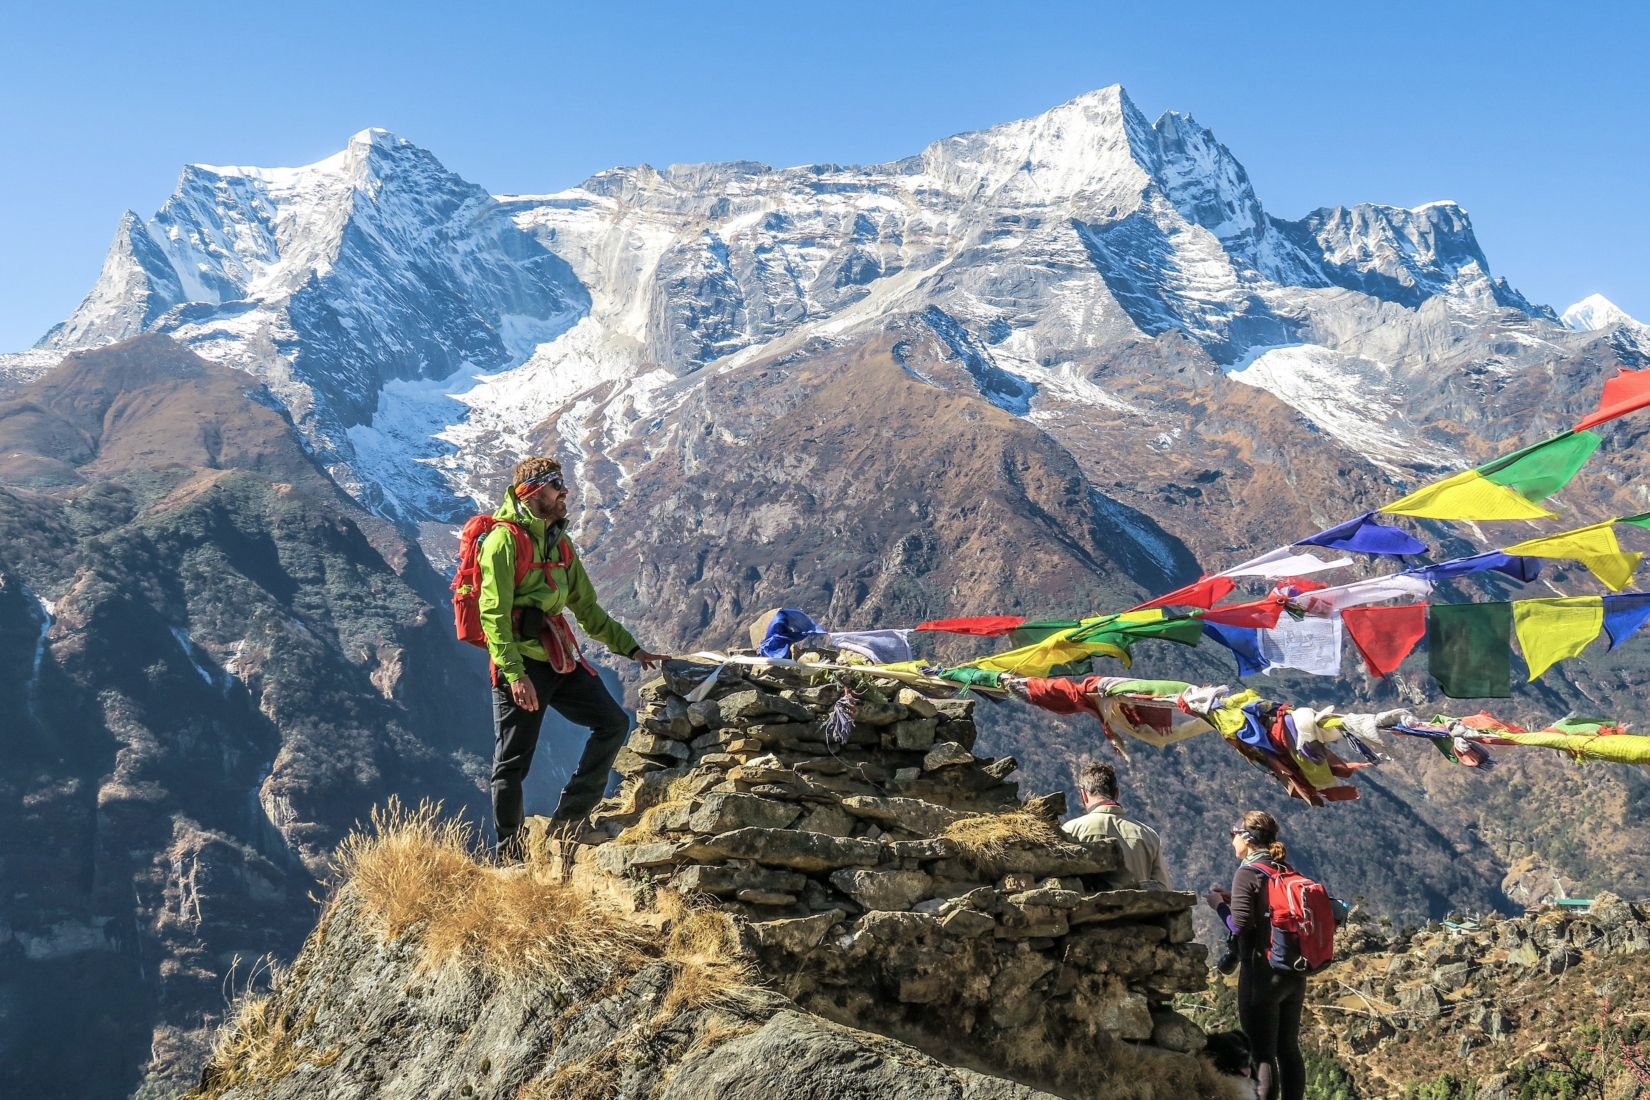 Trekker with backpack standing on rocks next to prayer flags while gazing at snow-capped mountains in Nepal